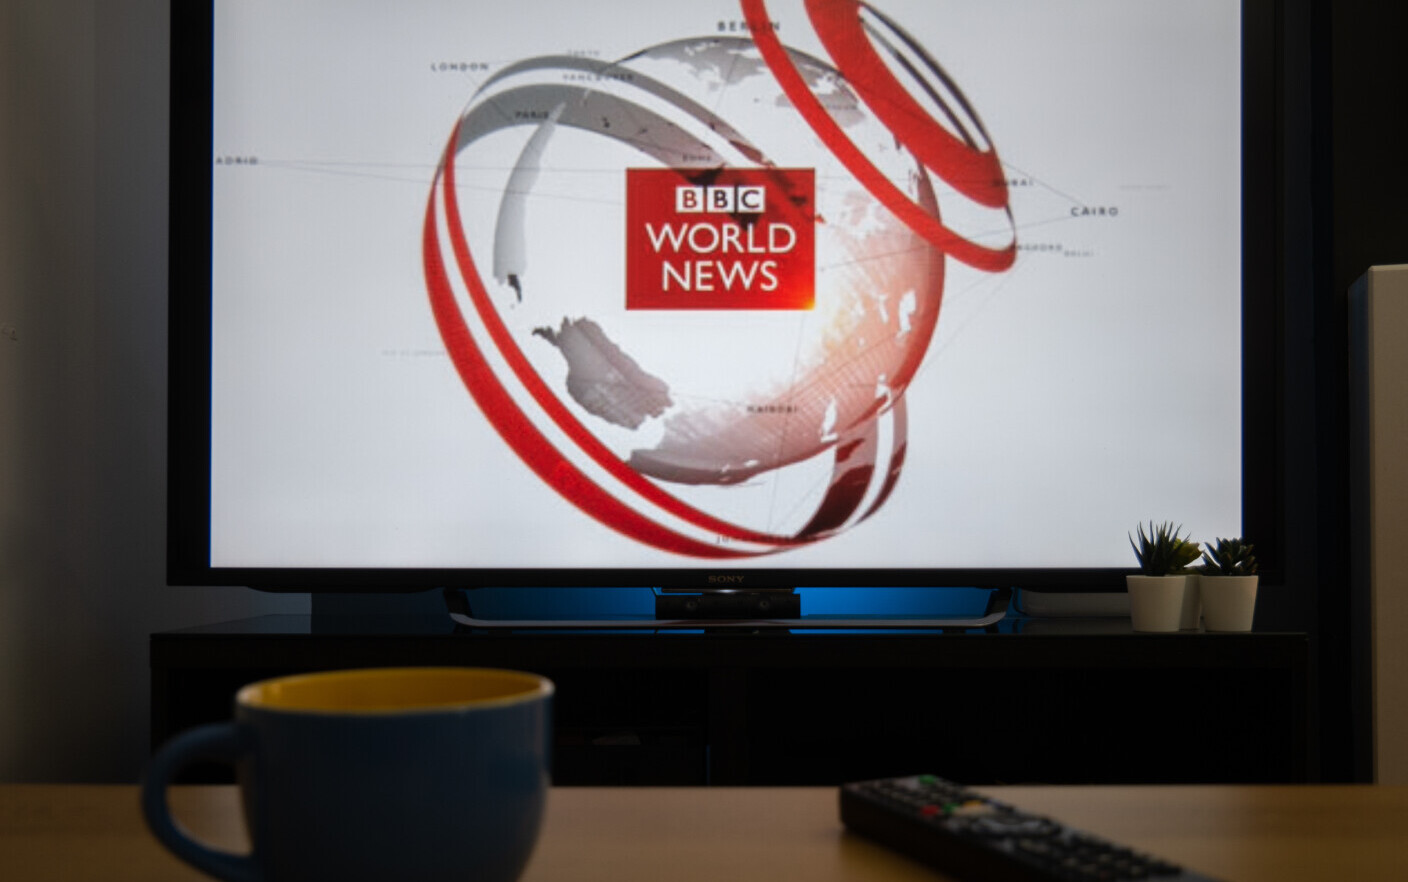 China blocked BBC World News on its soil.  Great Britain’s reaction